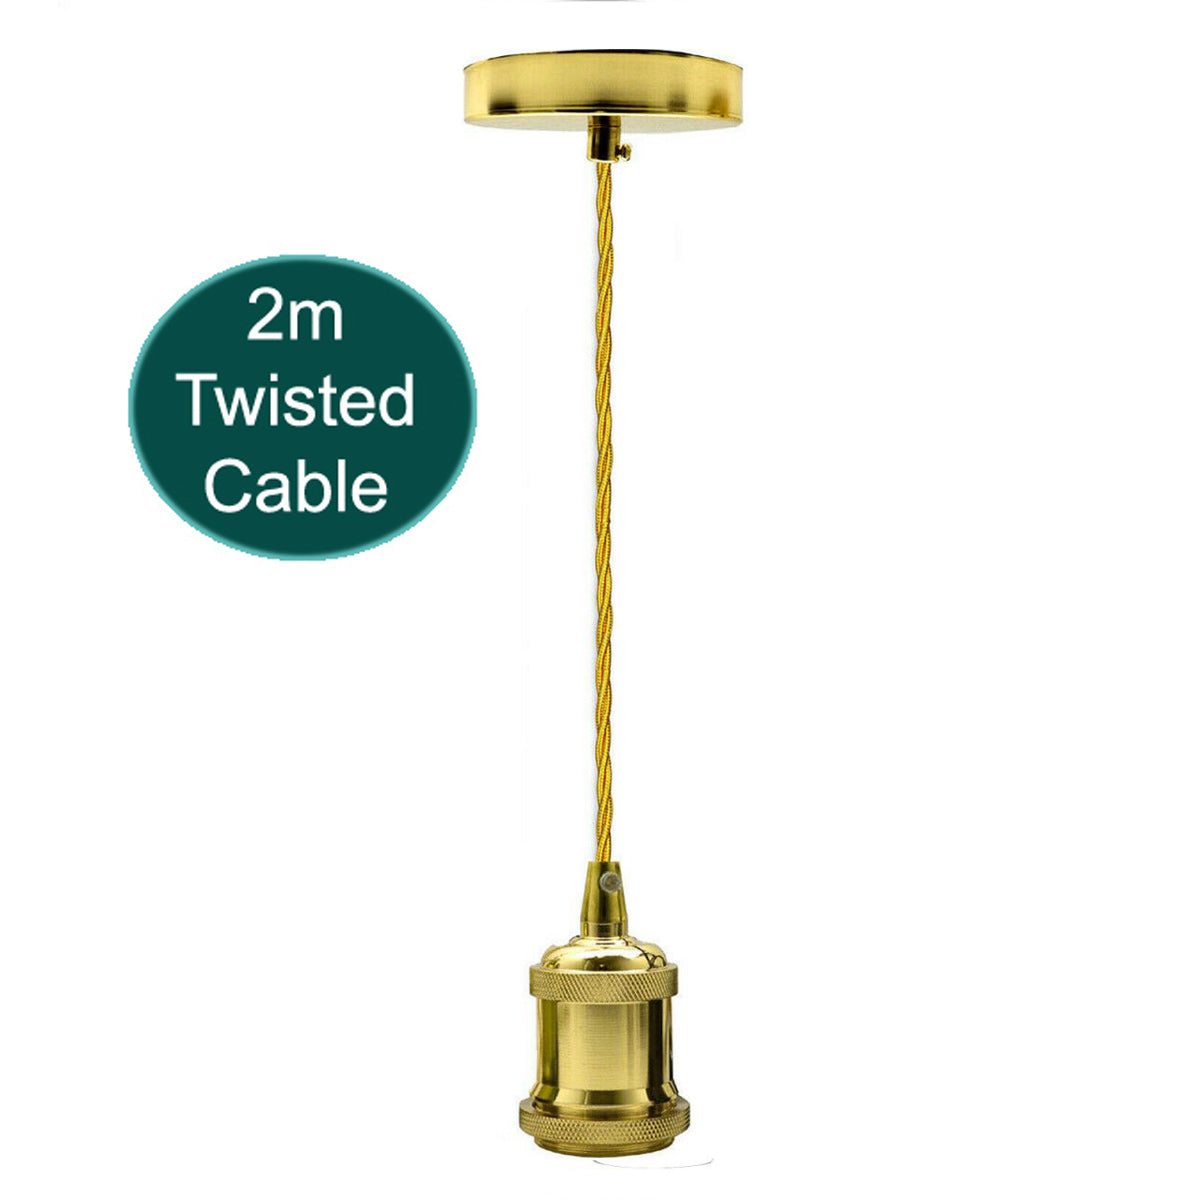 2m Gold Twisted Cable E27 Base Pendant French Gold Holder~1735 - electricalsone UK Ltd